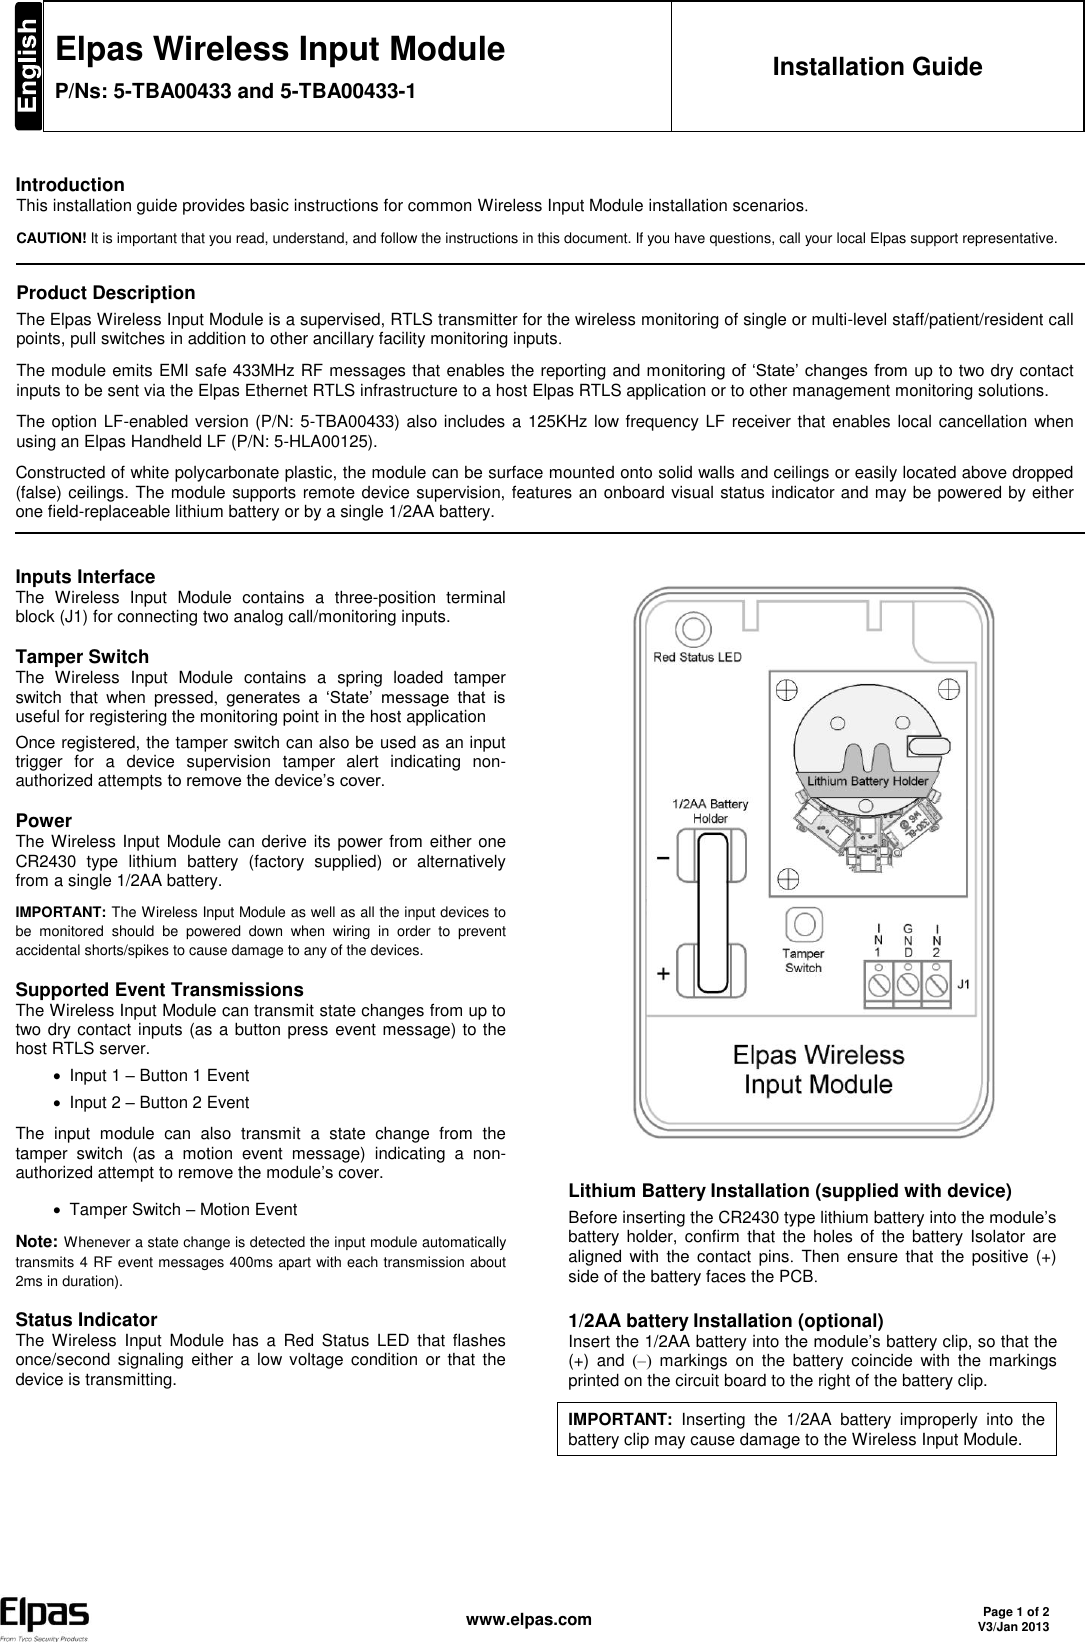  www.elpas.com Page 1 of 2 V3/Jan 2013   Elpas Wireless Input Module P/Ns: 5-TBA00433 and 5-TBA00433-1 Installation Guide    Introduction This installation guide provides basic instructions for common Wireless Input Module installation scenarios. CAUTION! It is important that you read, understand, and follow the instructions in this document. If you have questions, call your local Elpas support representative.   Product Description The Elpas Wireless Input Module is a supervised, RTLS transmitter for the wireless monitoring of single or multi-level staff/patient/resident call points, pull switches in addition to other ancillary facility monitoring inputs. The module emits EMI safe 433MHz RF messages that enables the reporting and monitoring of ‘State’  changes from up to two dry contact inputs to be sent via the Elpas Ethernet RTLS infrastructure to a host Elpas RTLS application or to other management monitoring solutions. The option LF-enabled version (P/N: 5-TBA00433) also includes a 125KHz low frequency LF receiver that enables local cancellation  when using an Elpas Handheld LF (P/N: 5-HLA00125). Constructed of white polycarbonate plastic, the module can be surface mounted onto solid walls and ceilings or easily located above dropped (false) ceilings. The module supports remote device supervision, features an onboard visual status indicator and may be powered by either one field-replaceable lithium battery or by a single 1/2AA battery.   Inputs Interface The  Wireless  Input  Module  contains  a three-position  terminal block (J1) for connecting two analog call/monitoring inputs. Tamper Switch The  Wireless  Input  Module  contains  a  spring  loaded  tamper switch  that  when  pressed, generates  a  ‘State’  message  that  is useful for registering the monitoring point in the host application Once registered, the tamper switch can also be used as an input trigger  for  a  device  supervision  tamper  alert  indicating  non-authorized attempts to remove the device’s cover. Power The Wireless Input Module can derive its power from either one CR2430  type  lithium  battery  (factory  supplied)  or  alternatively from a single 1/2AA battery. IMPORTANT: The Wireless Input Module as well as all the input devices to be  monitored  should  be  powered  down  when  wiring  in  order  to  prevent accidental shorts/spikes to cause damage to any of the devices. Supported Event Transmissions The Wireless Input Module can transmit state changes from up to two dry contact inputs (as a button press event message) to the host RTLS server.    Input 1 – Button 1 Event   Input 2 – Button 2 Event The  input  module  can  also  transmit  a  state  change  from  the tamper  switch  (as  a  motion  event  message)  indicating  a  non-authorized attempt to remove the module’s cover.   Tamper Switch – Motion Event Note: Whenever a state change is detected the input module automatically transmits 4 RF event messages 400ms apart with each transmission about 2ms in duration). Status Indicator The  Wireless  Input  Module  has  a  Red  Status  LED  that  flashes once/second  signaling either a  low  voltage  condition  or that  the device is transmitting.     Lithium Battery Installation (supplied with device) Before inserting the CR2430 type lithium battery into the module’s battery holder,  confirm  that the  holes of the  battery Isolator  are aligned with  the  contact  pins.  Then  ensure  that  the  positive (+) side of the battery faces the PCB. 1/2AA battery Installation (optional) Insert the 1/2AA battery into the module’s battery clip, so that the (+)  and  (–)   markings  on  the  battery  coincide  with  the  markings printed on the circuit board to the right of the battery clip. IMPORTANT:  Inserting  the  1/2AA  battery  improperly  into  the battery clip may cause damage to the Wireless Input Module.      